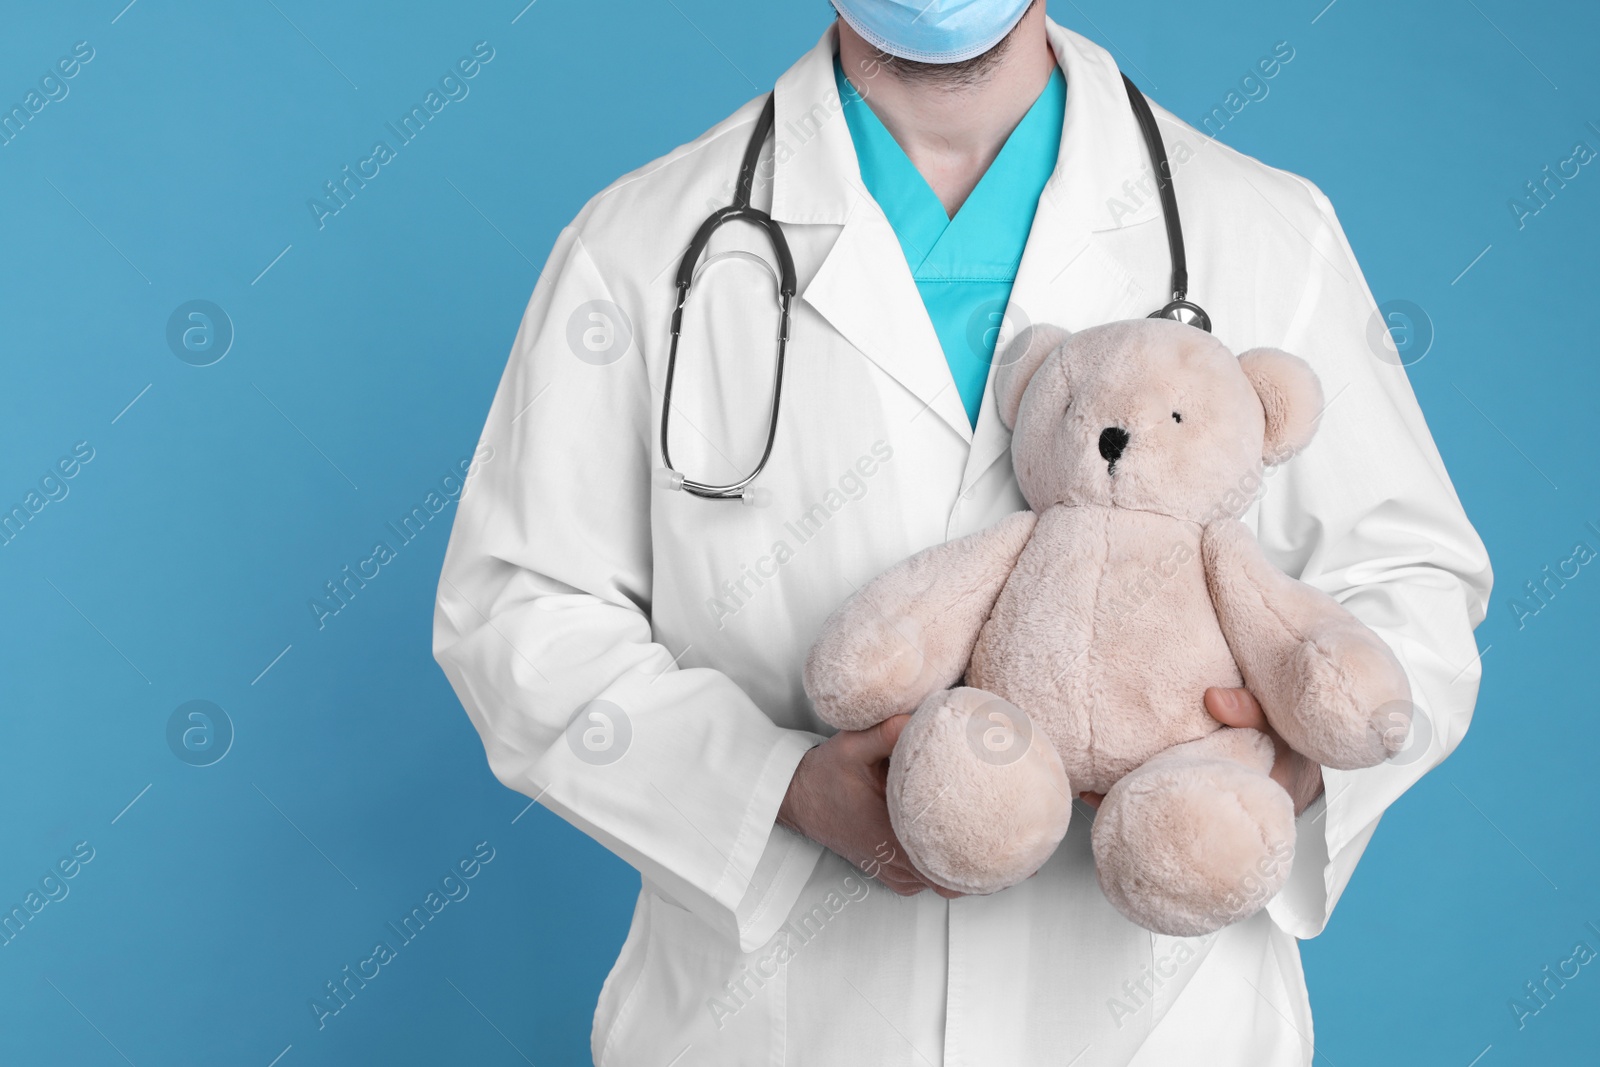 Photo of Pediatrician with teddy bear and stethoscope on light blue background, closeup